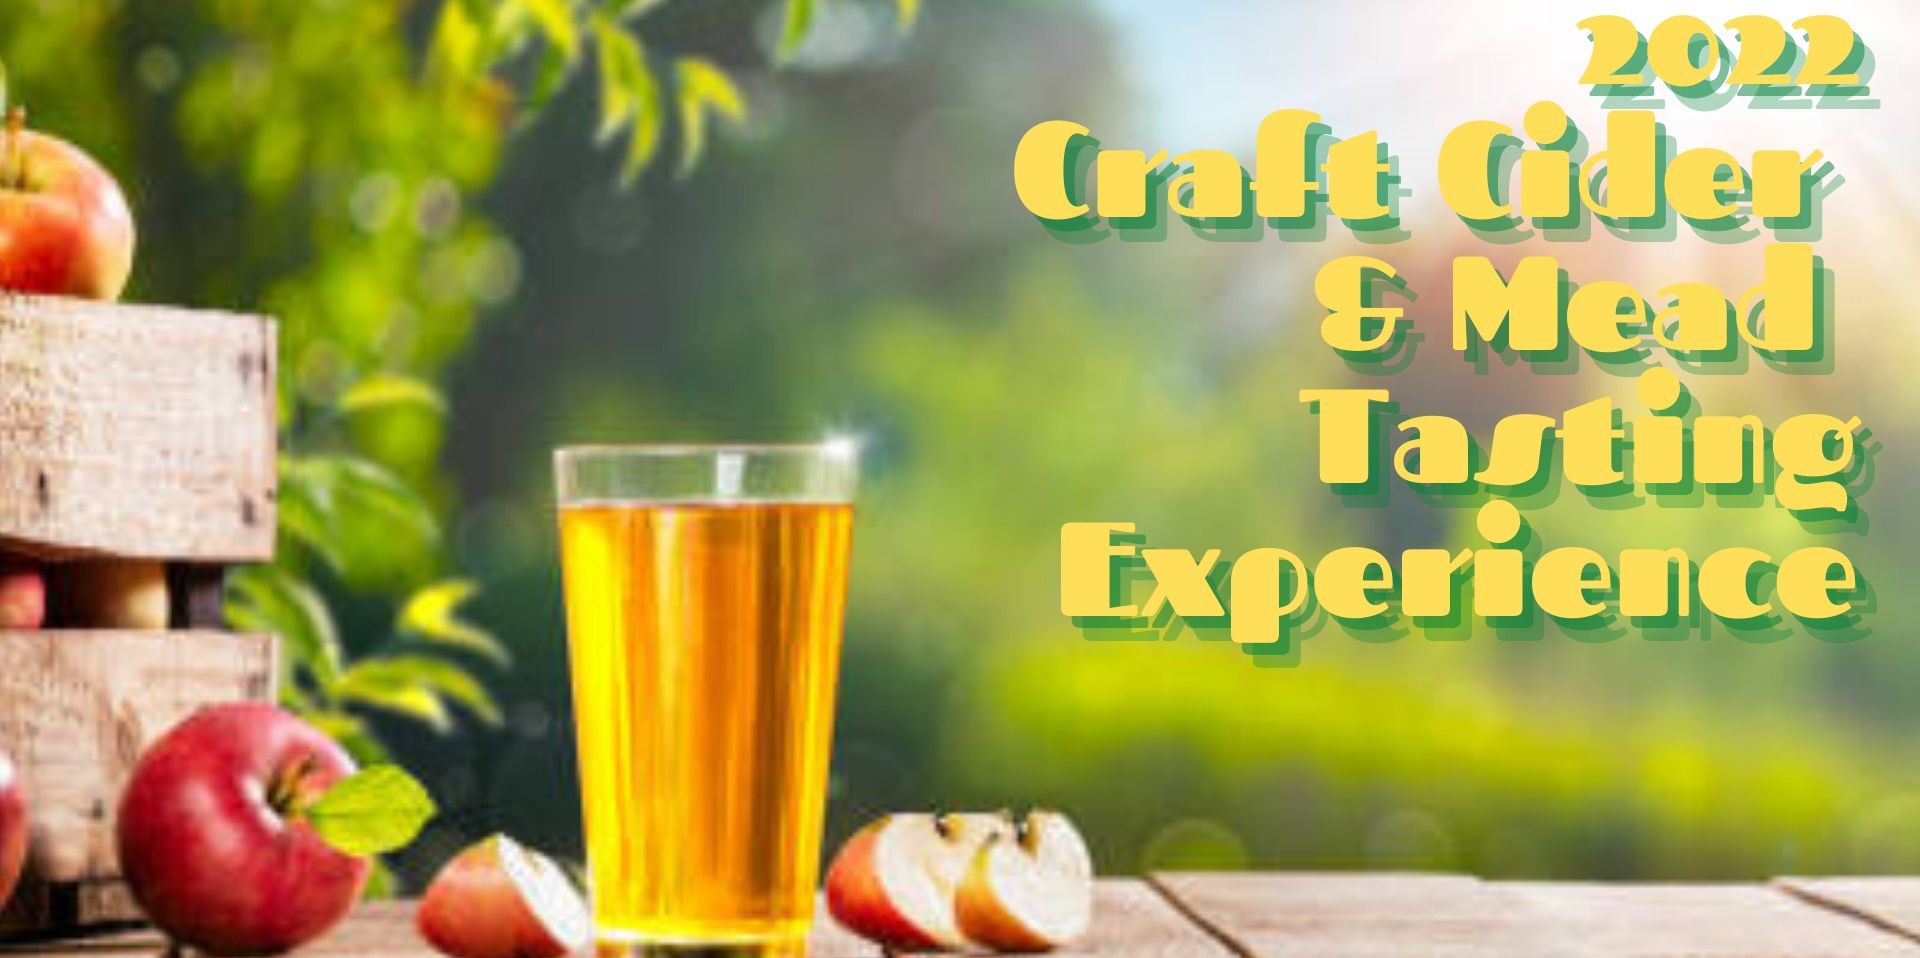 2022 Craft Cider & Mead Tasting Experience promotional image